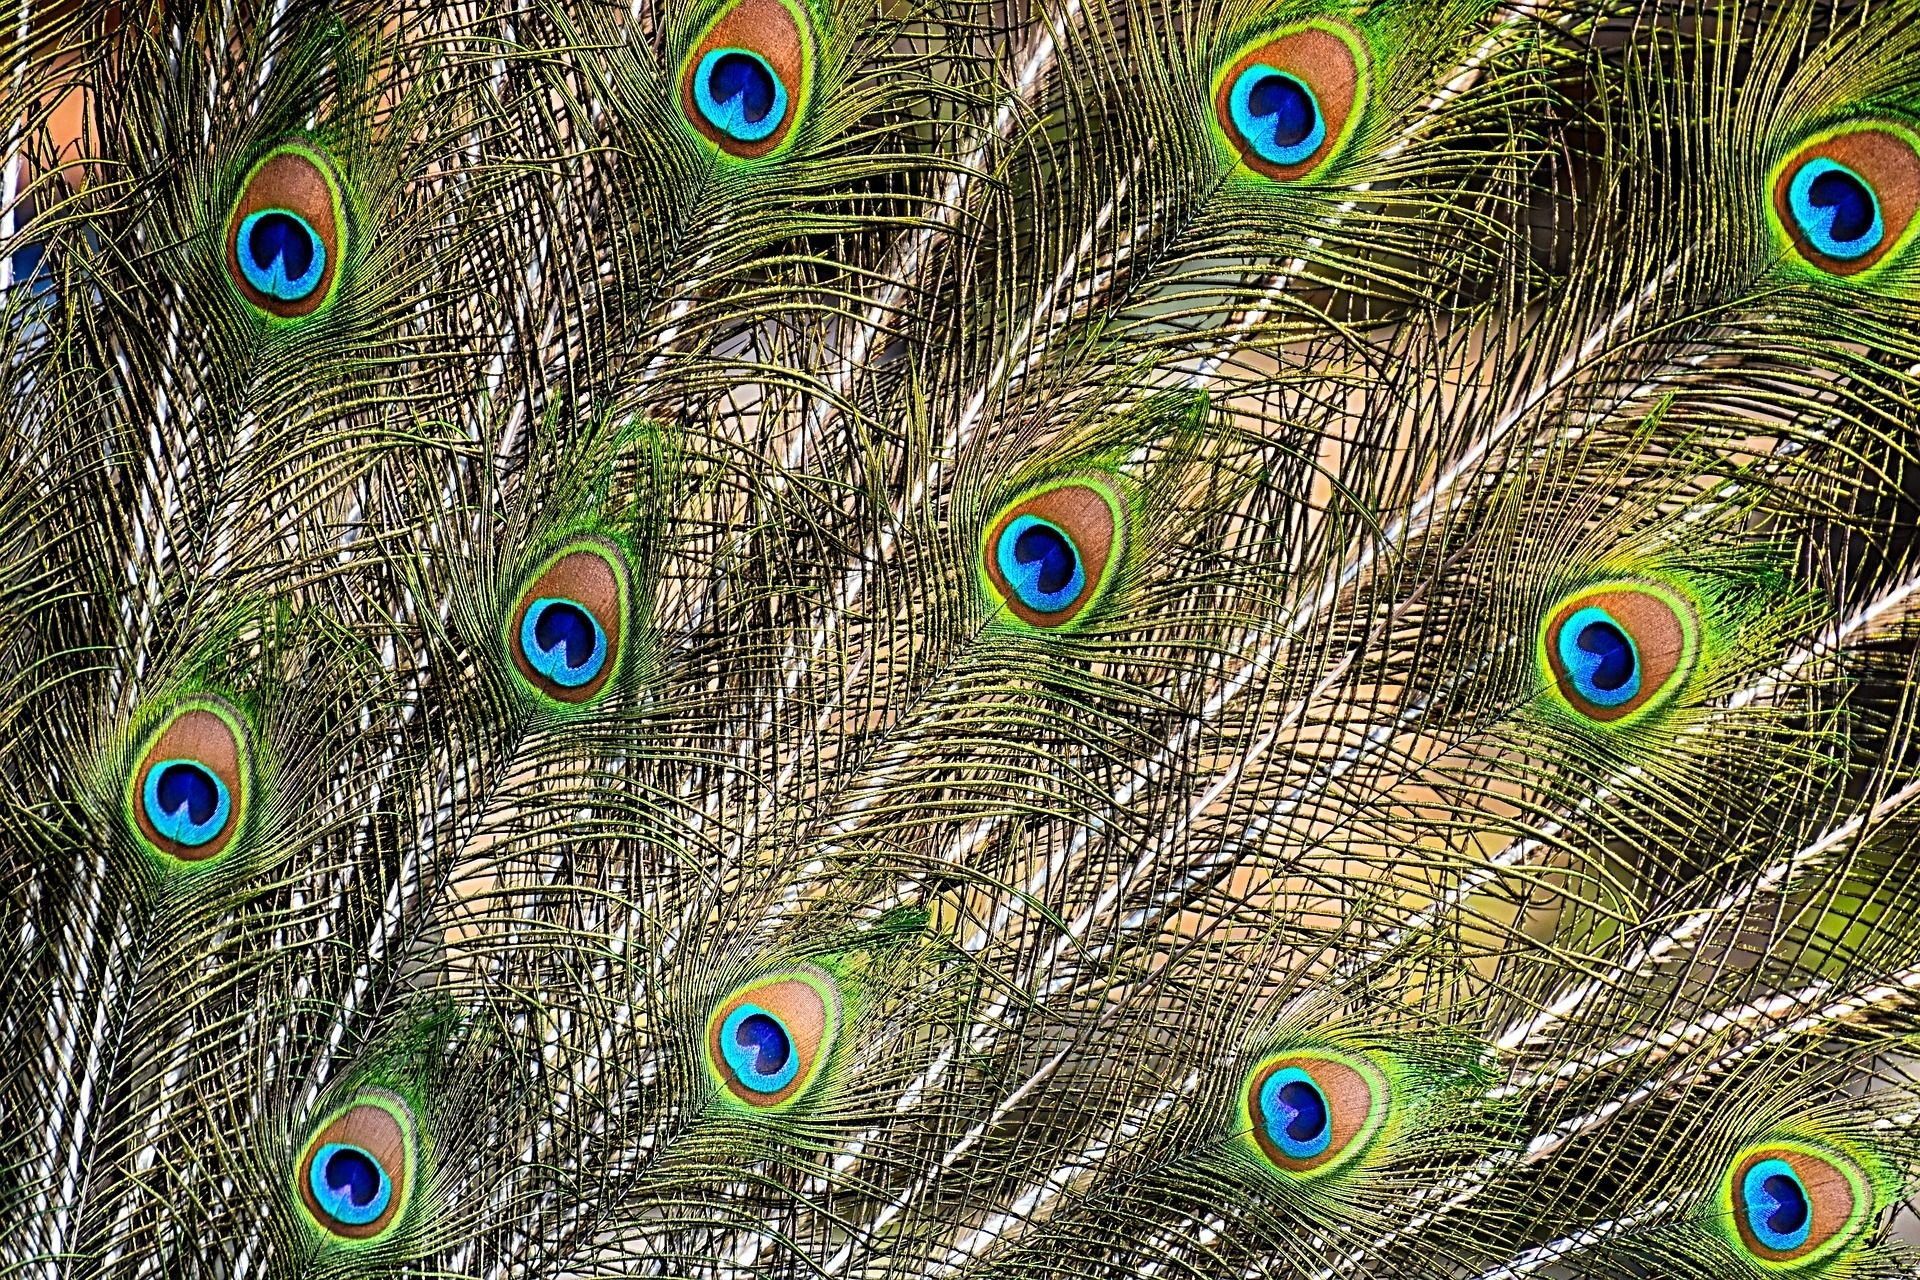 1920x1280 peacock feathers hd 1920p wallpaper